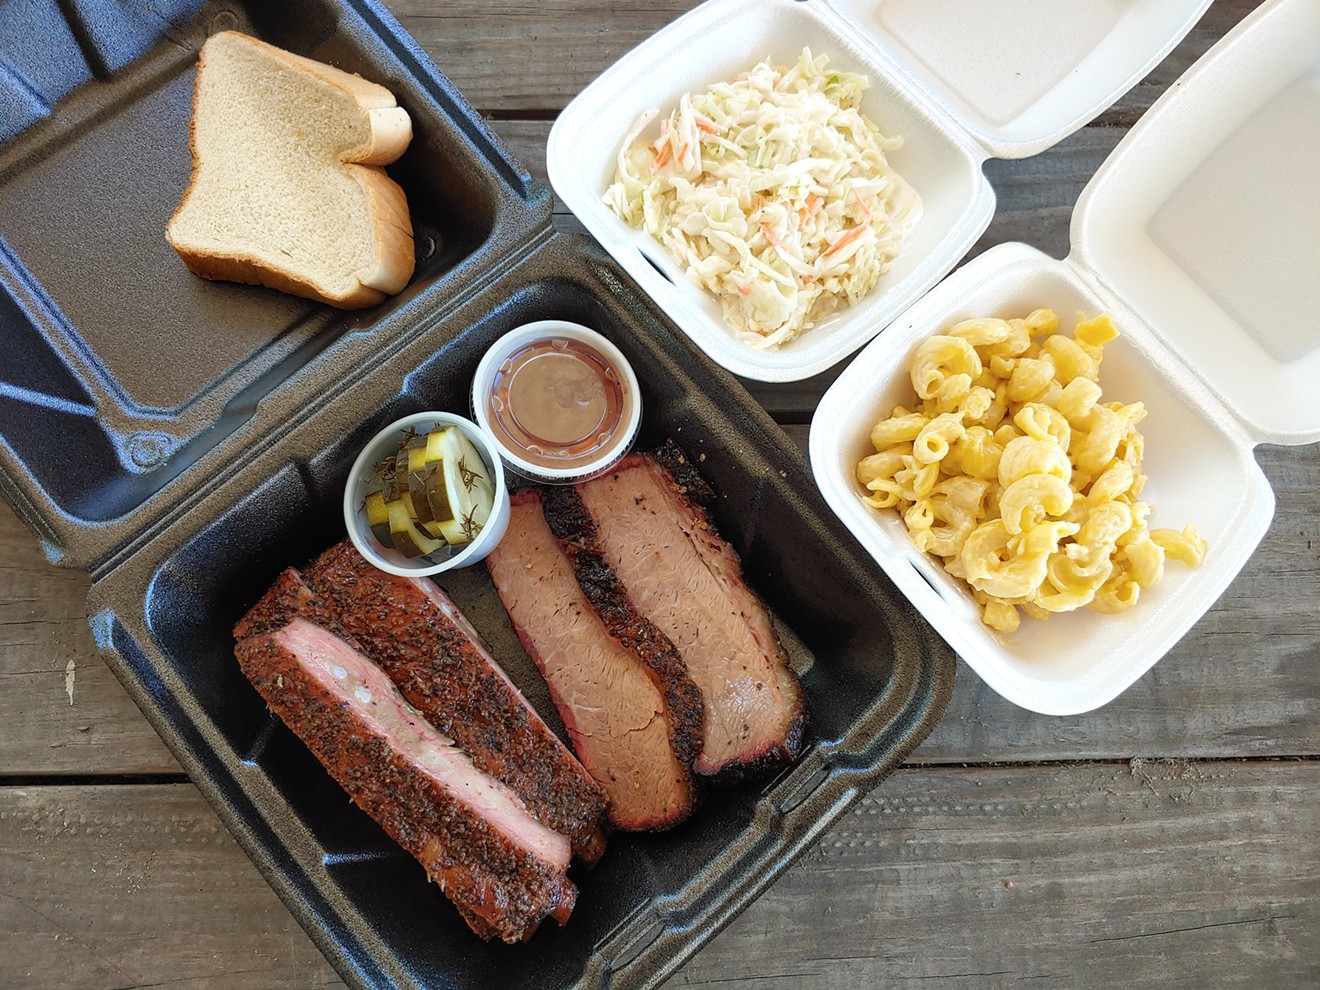 A rib and brisket plate with two sides from the recently opened Parry Avenue Barbecue Co.